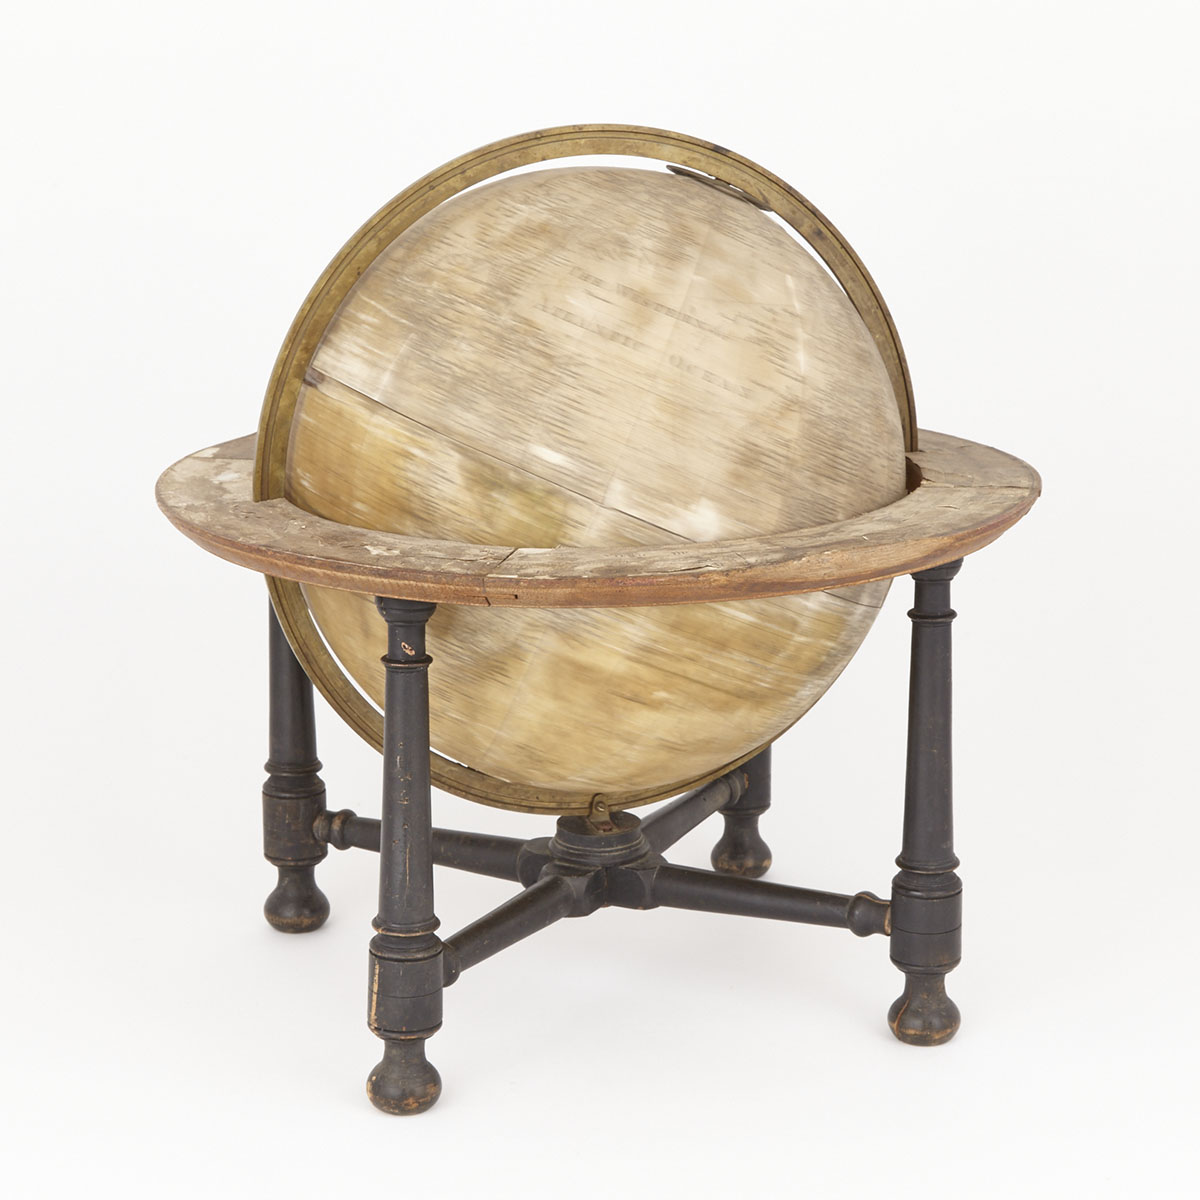 George III 12 Inch Terrestrial Library Globe on Stand, Dudley Adams, late 18th century